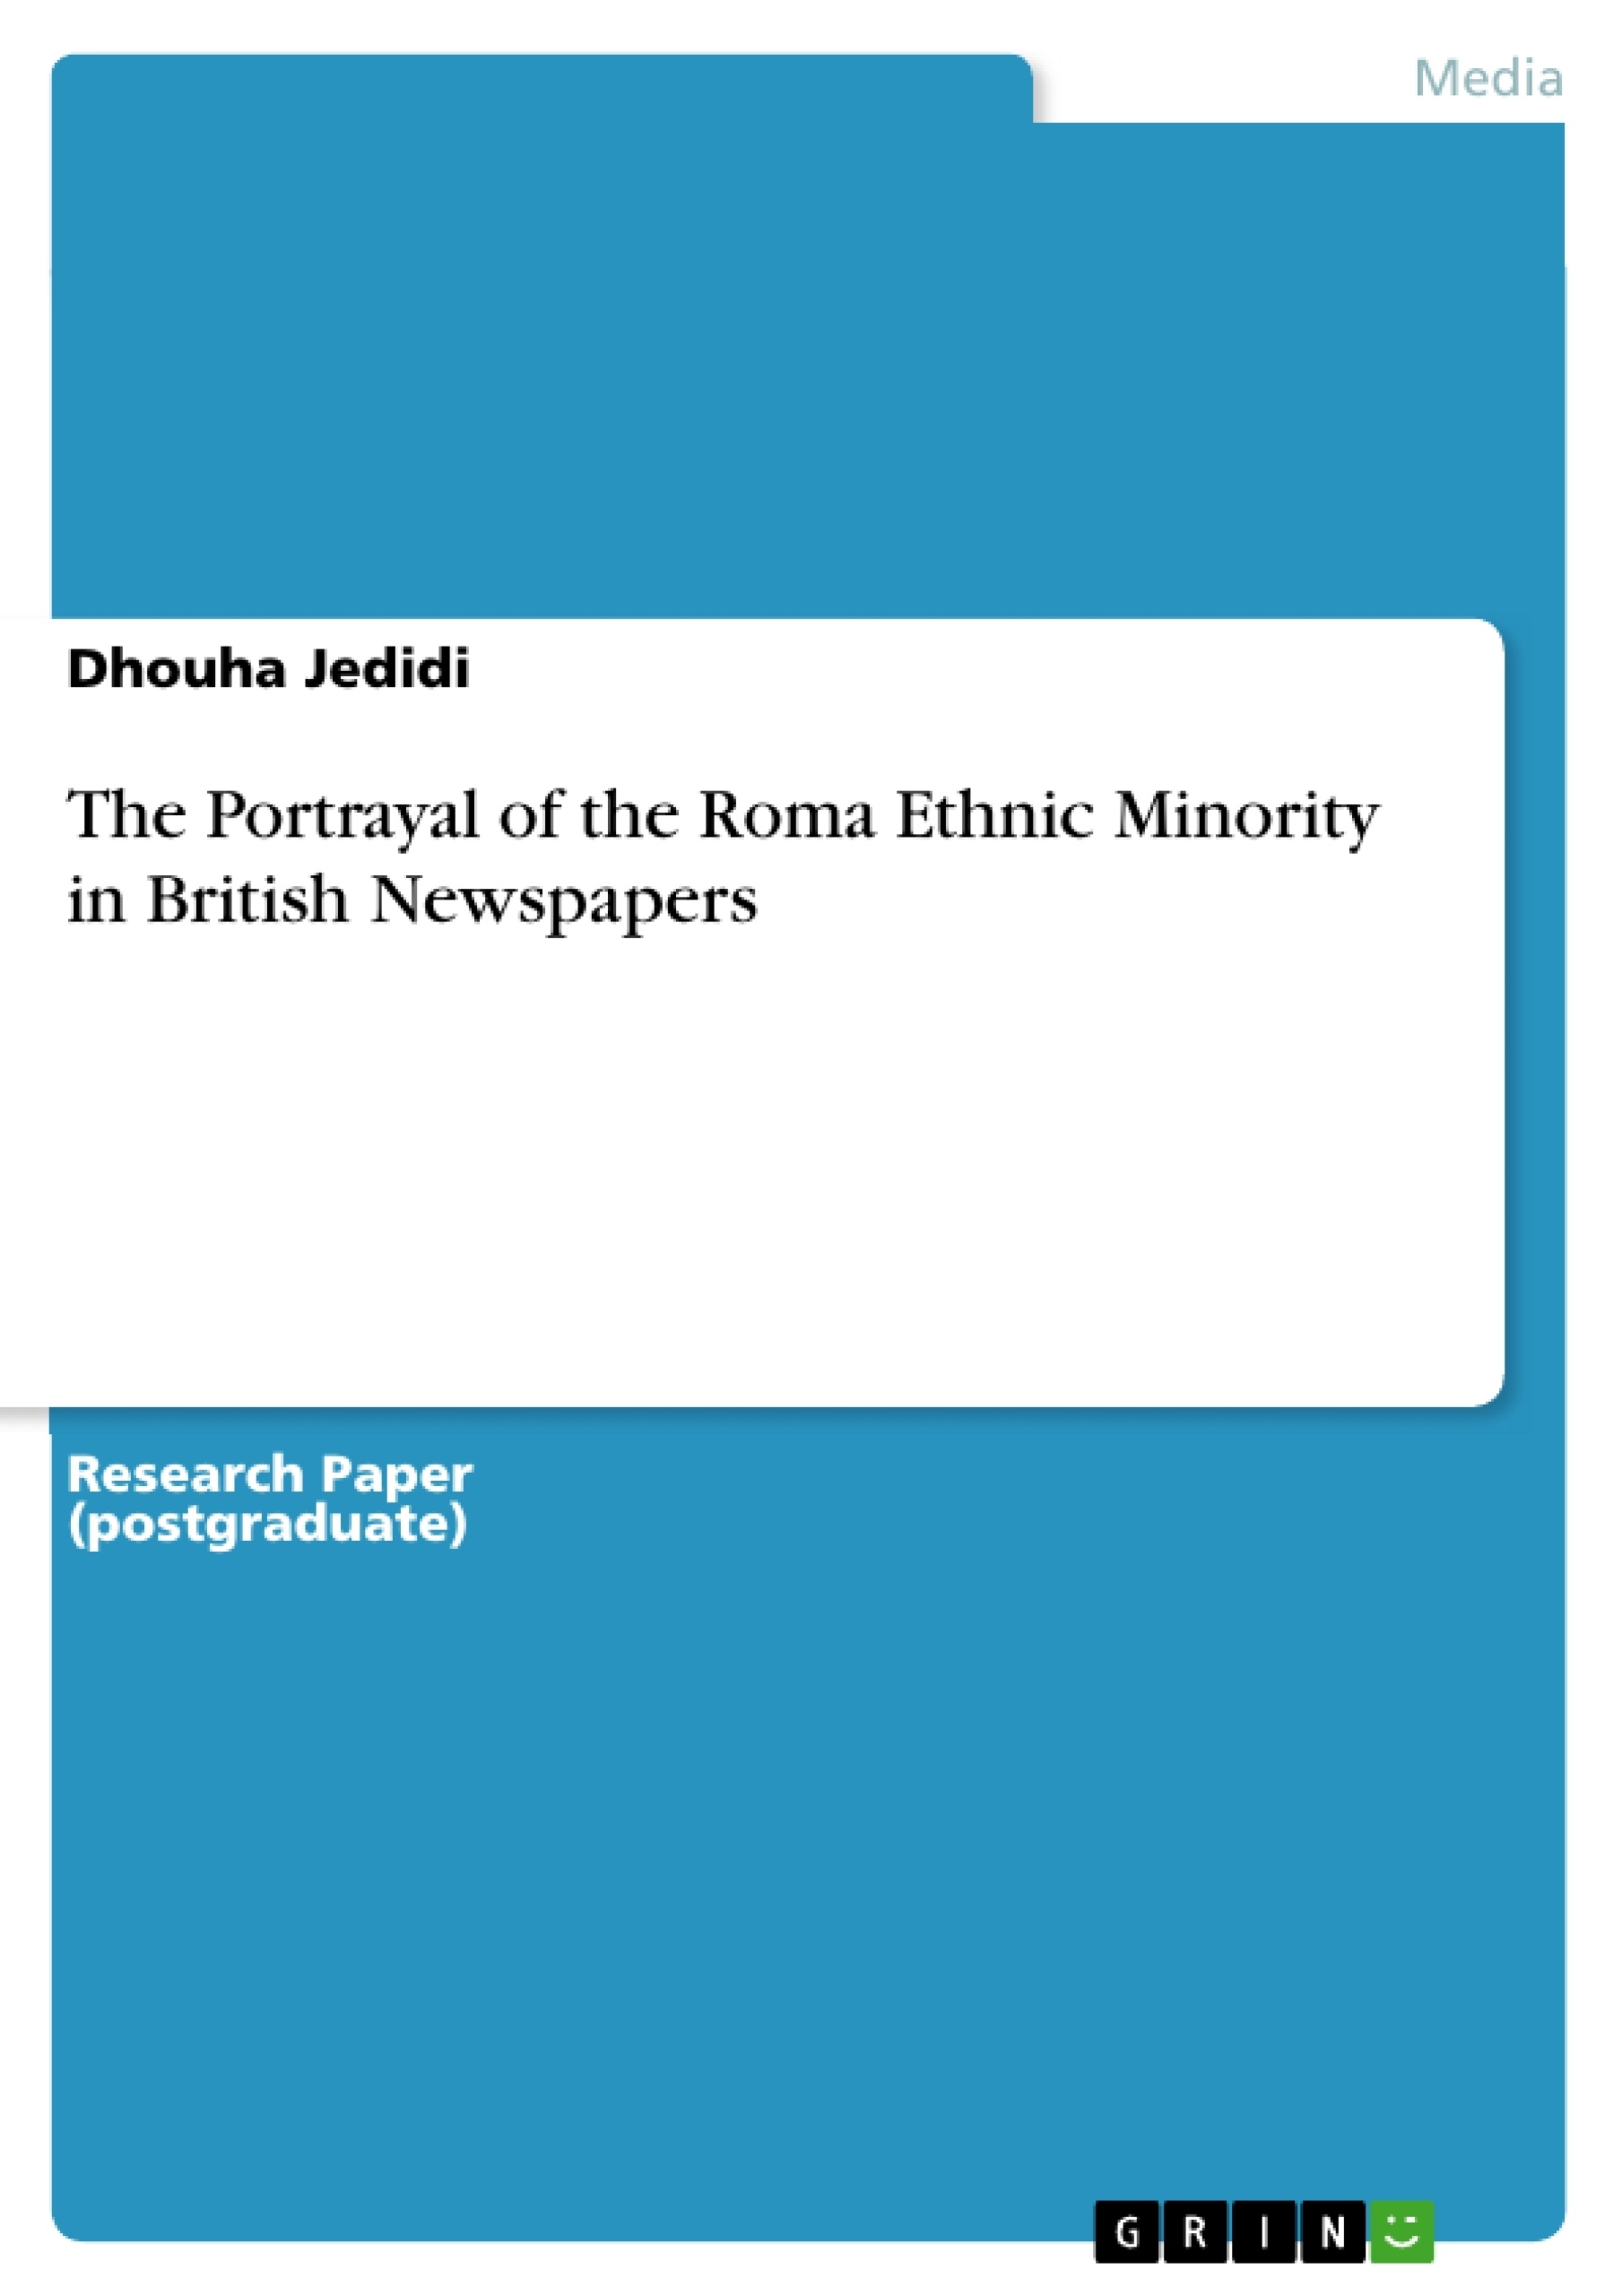 Titre: The Portrayal of the Roma Ethnic Minority in British Newspapers